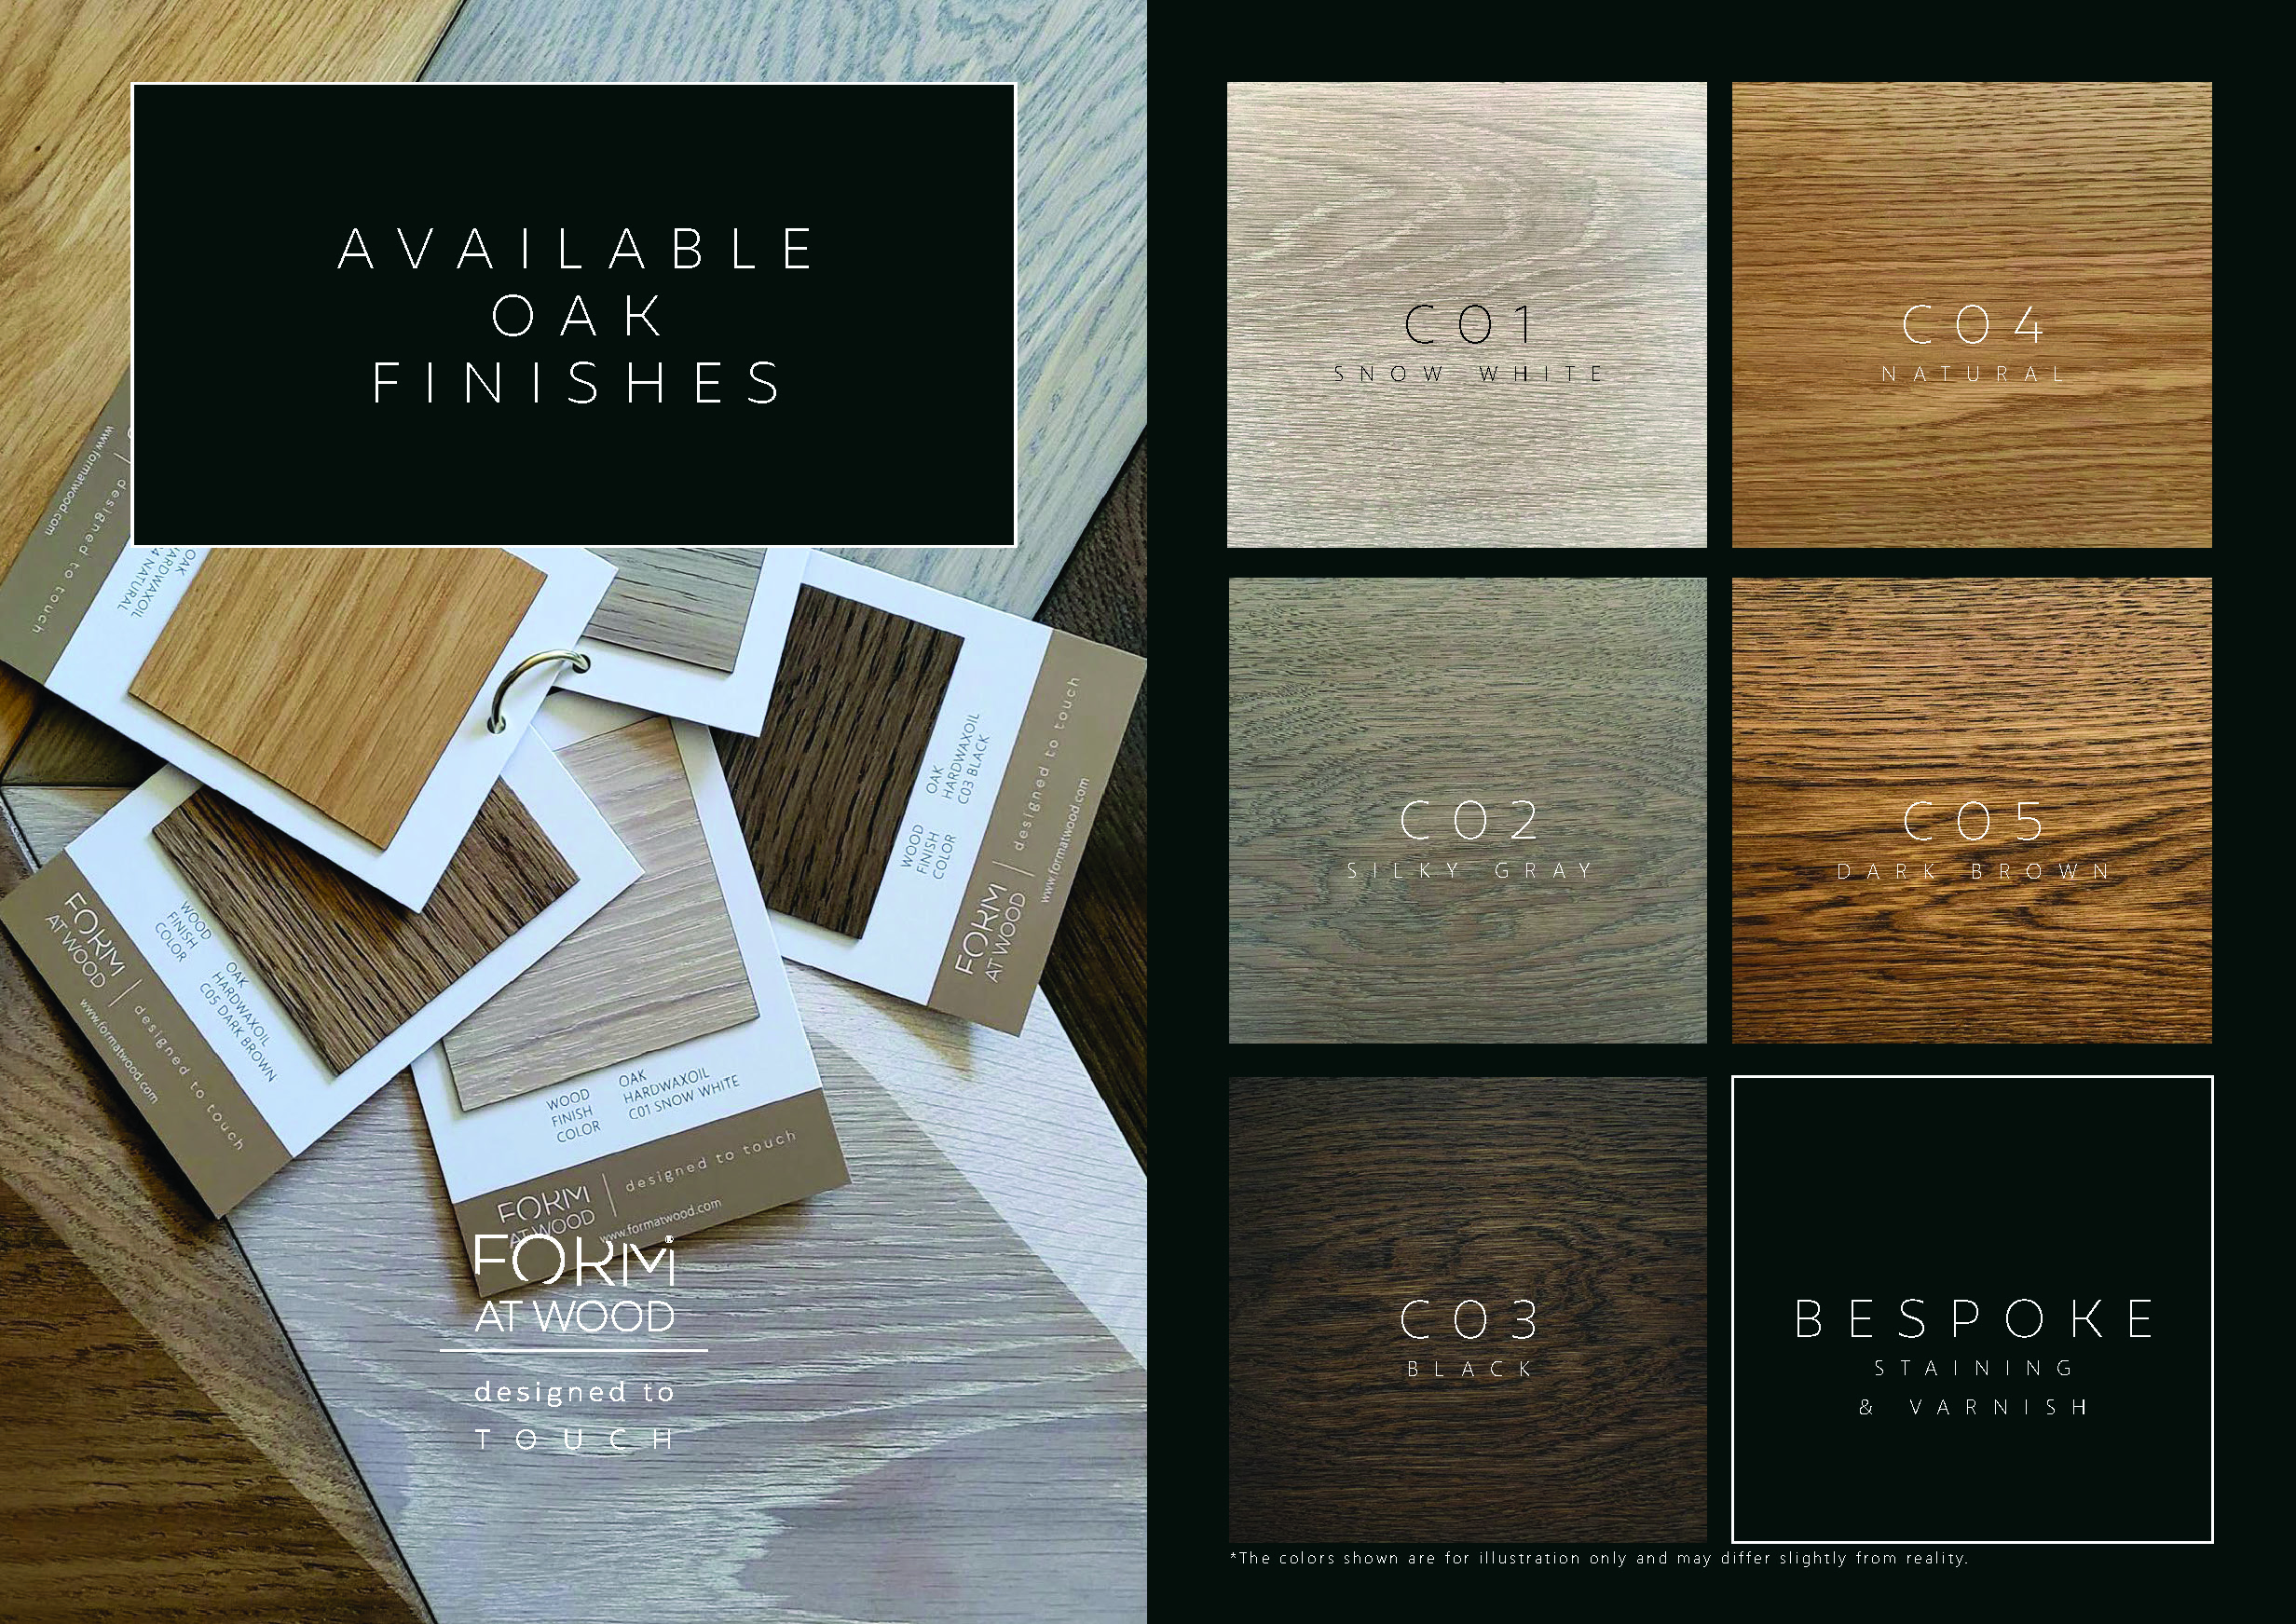 picture of available oak finishes